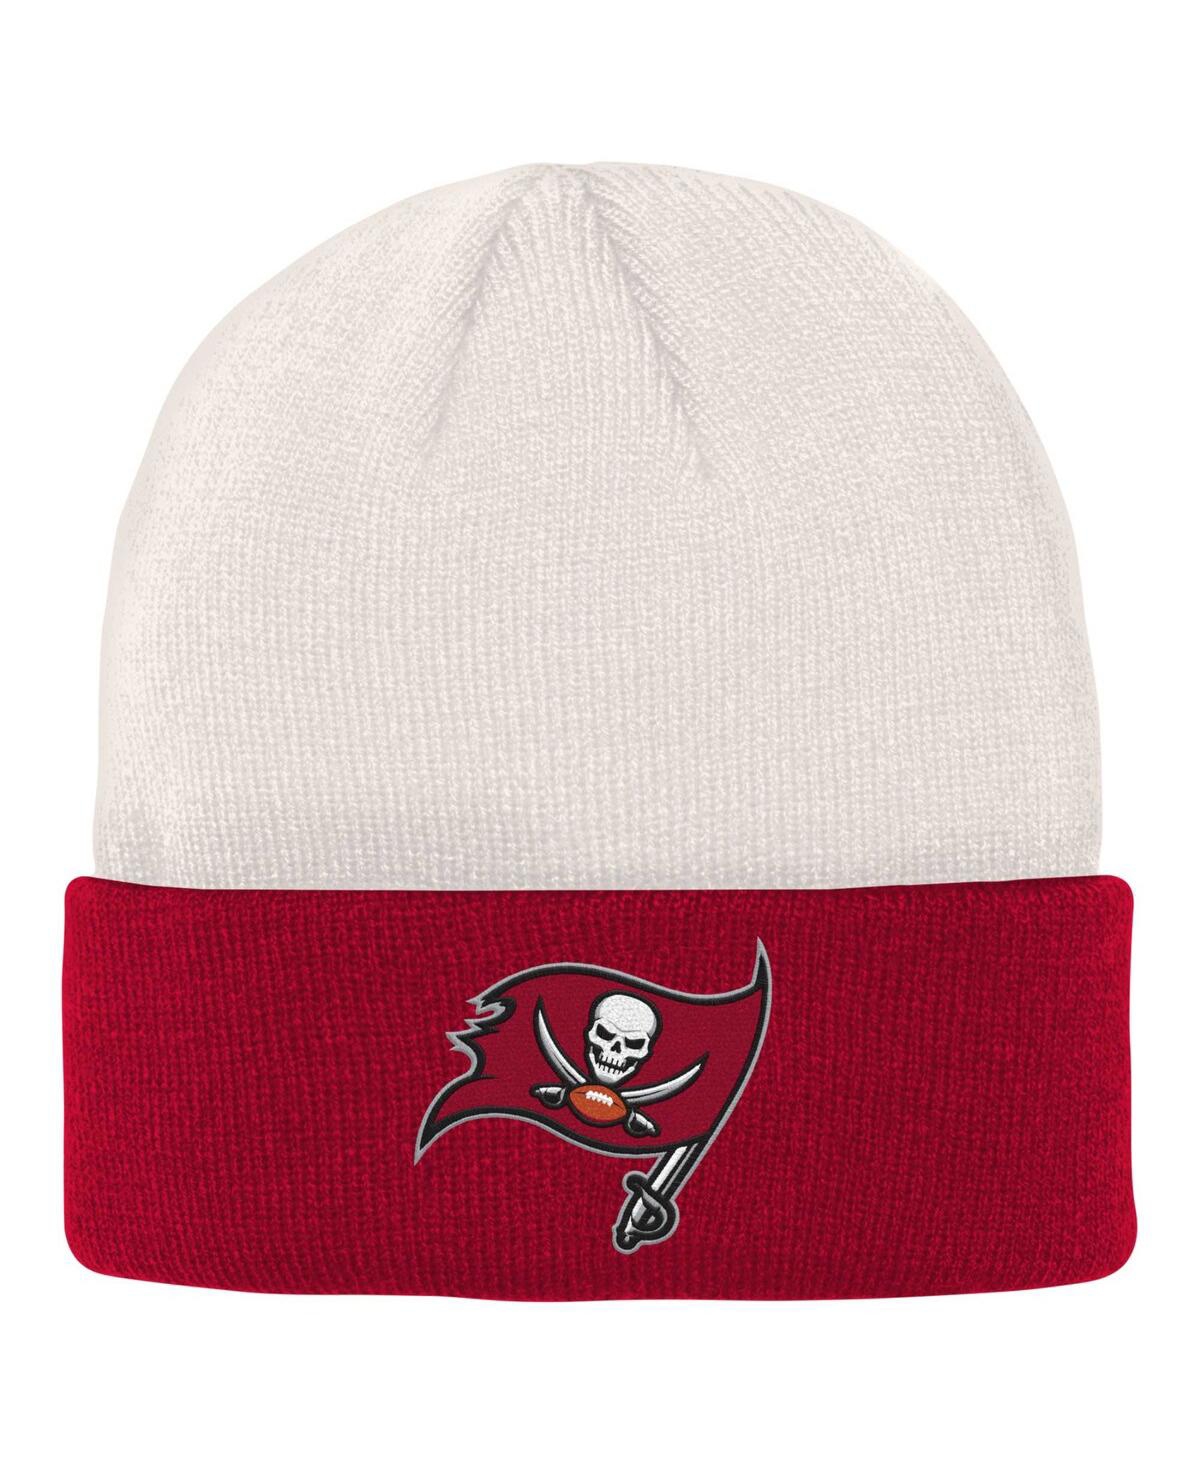 Outerstuff Kids' Big Boys And Girls Cream, Red Tampa Bay Buccaneers Bone Cuffed Knit Hat In Cream,red